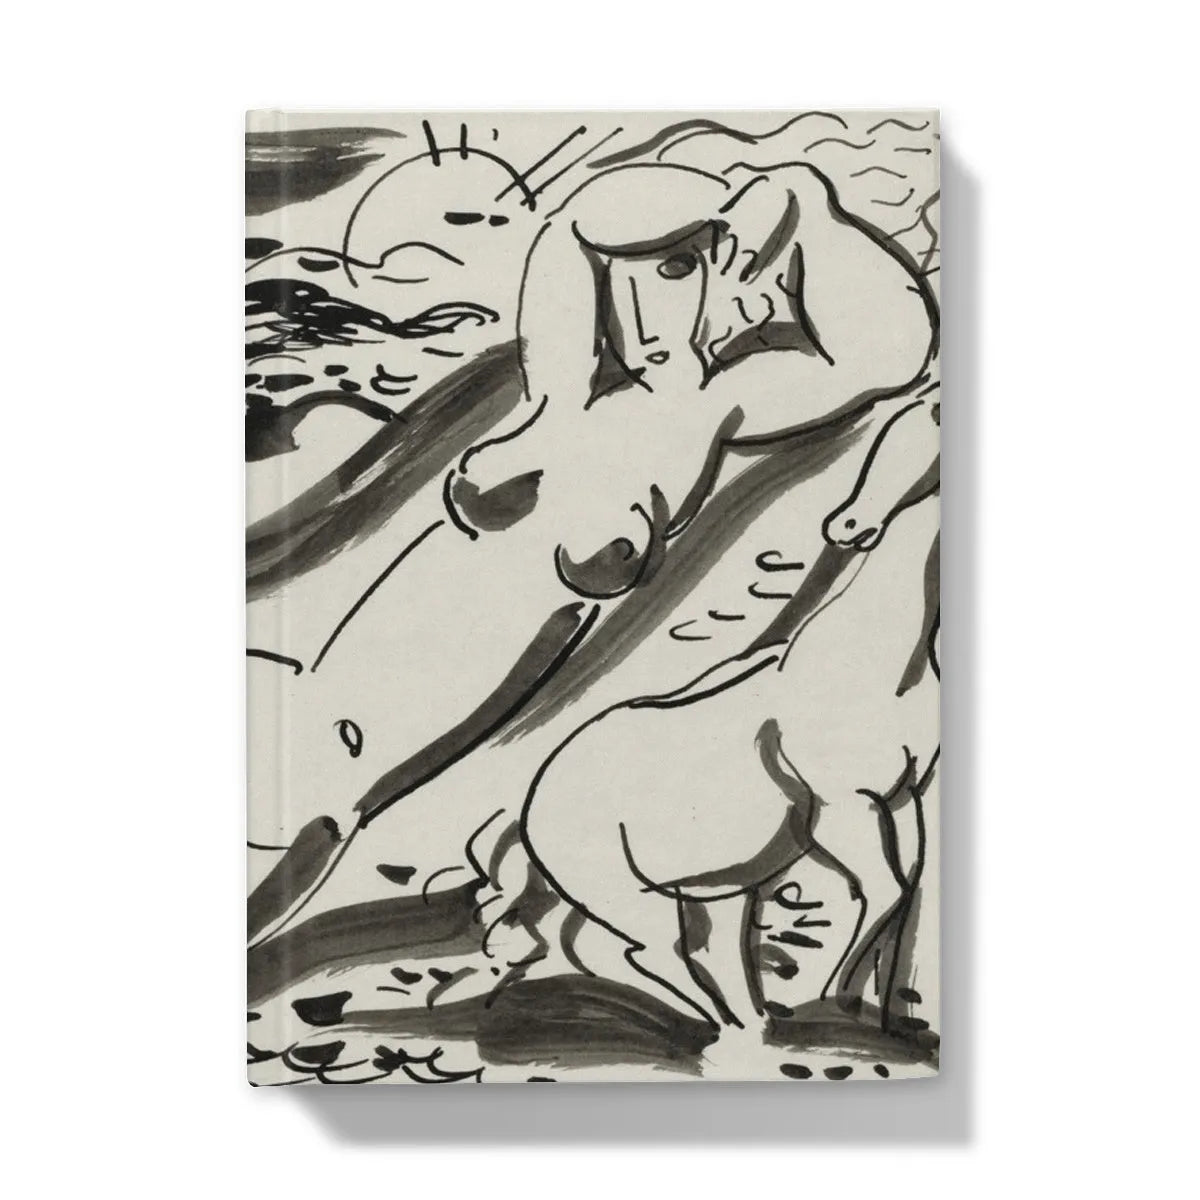 Nude Woman And Two Horses With The Sea By Leo Gestel Hardback Journal - 5’x7’ / Lined - Notebooks & Notepads